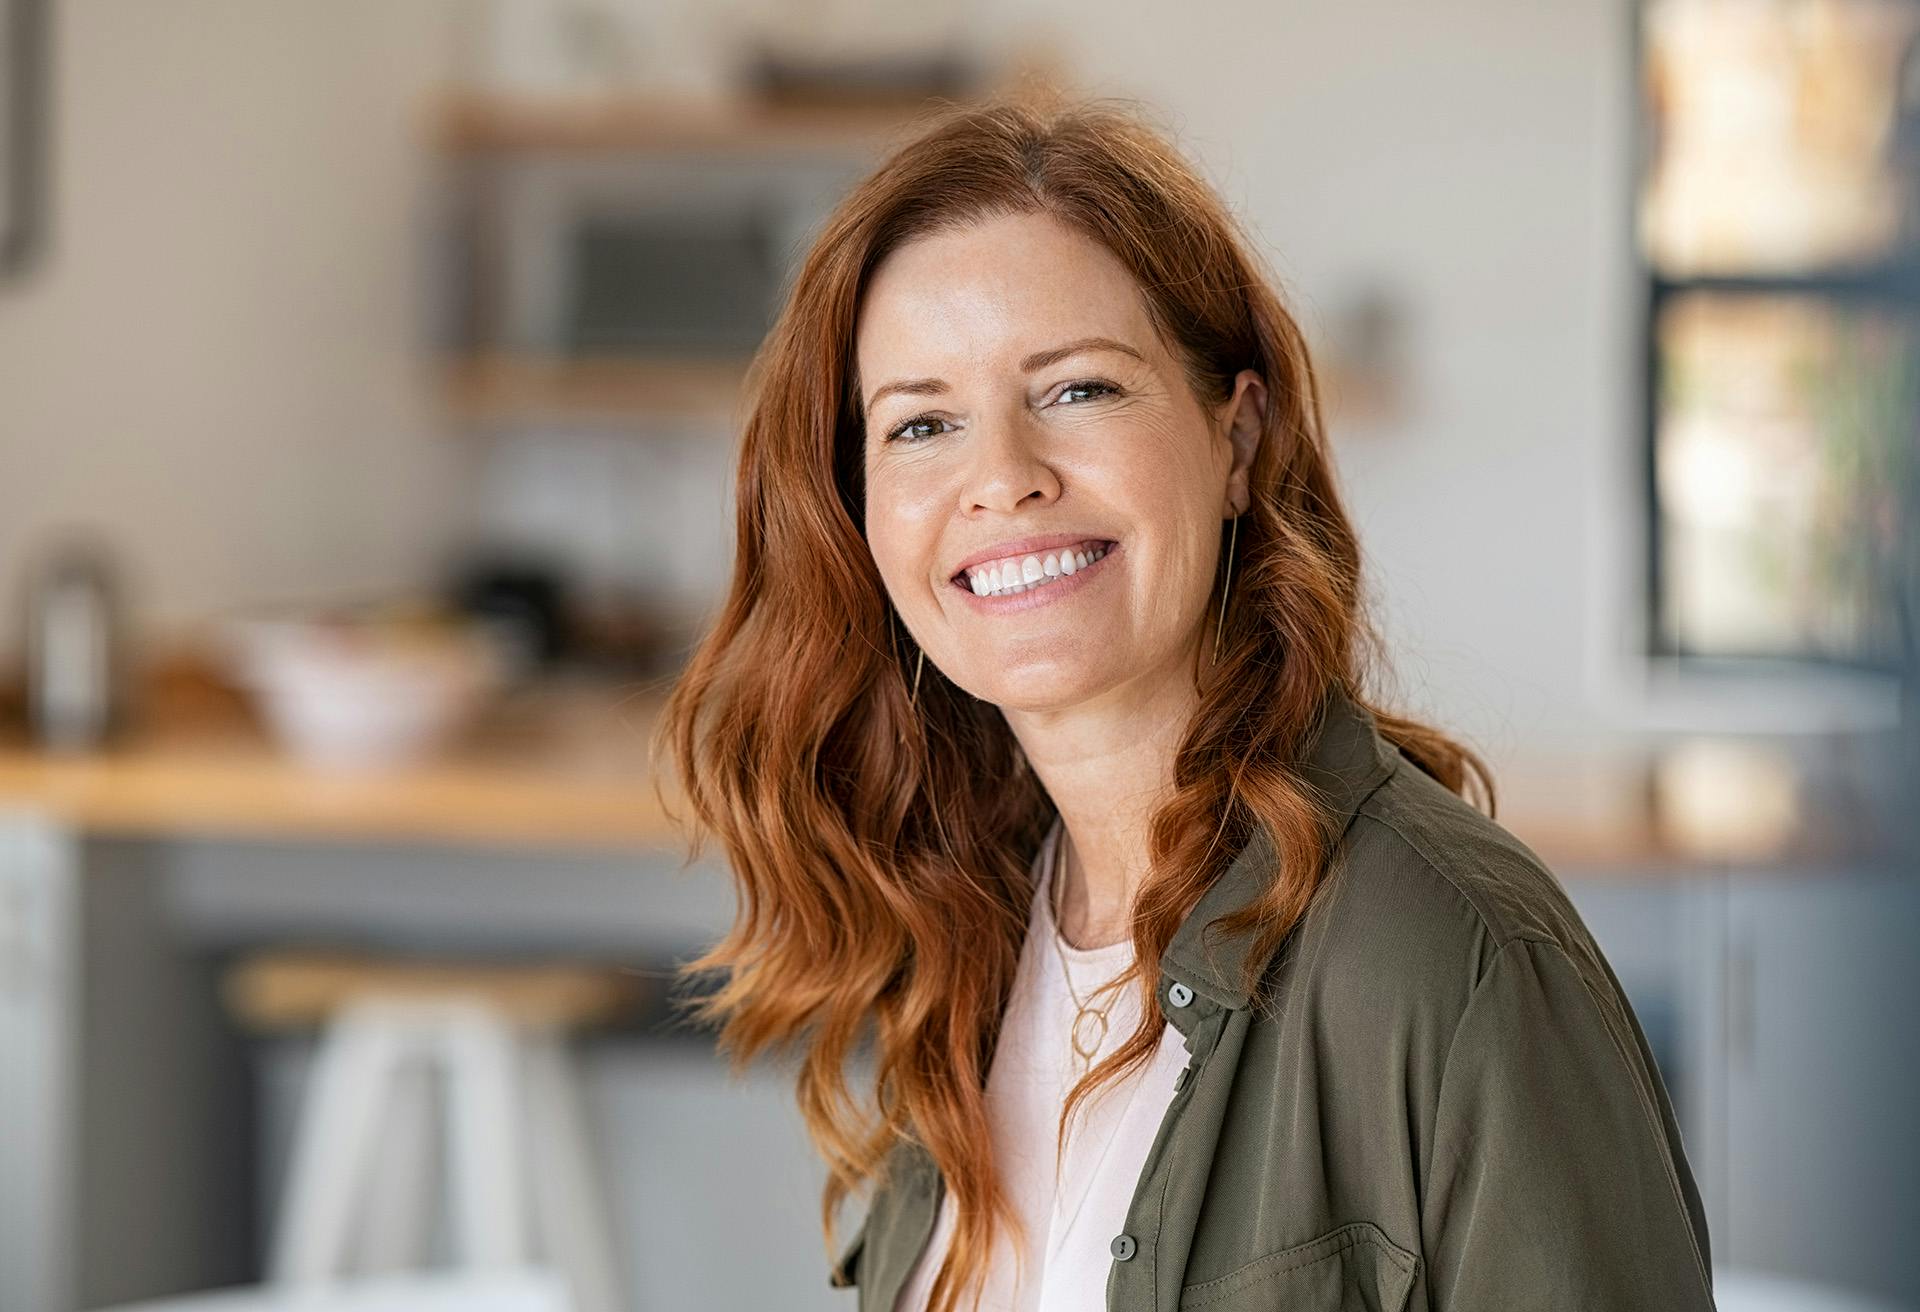 Woman with Red Hair Smiling at the Camera